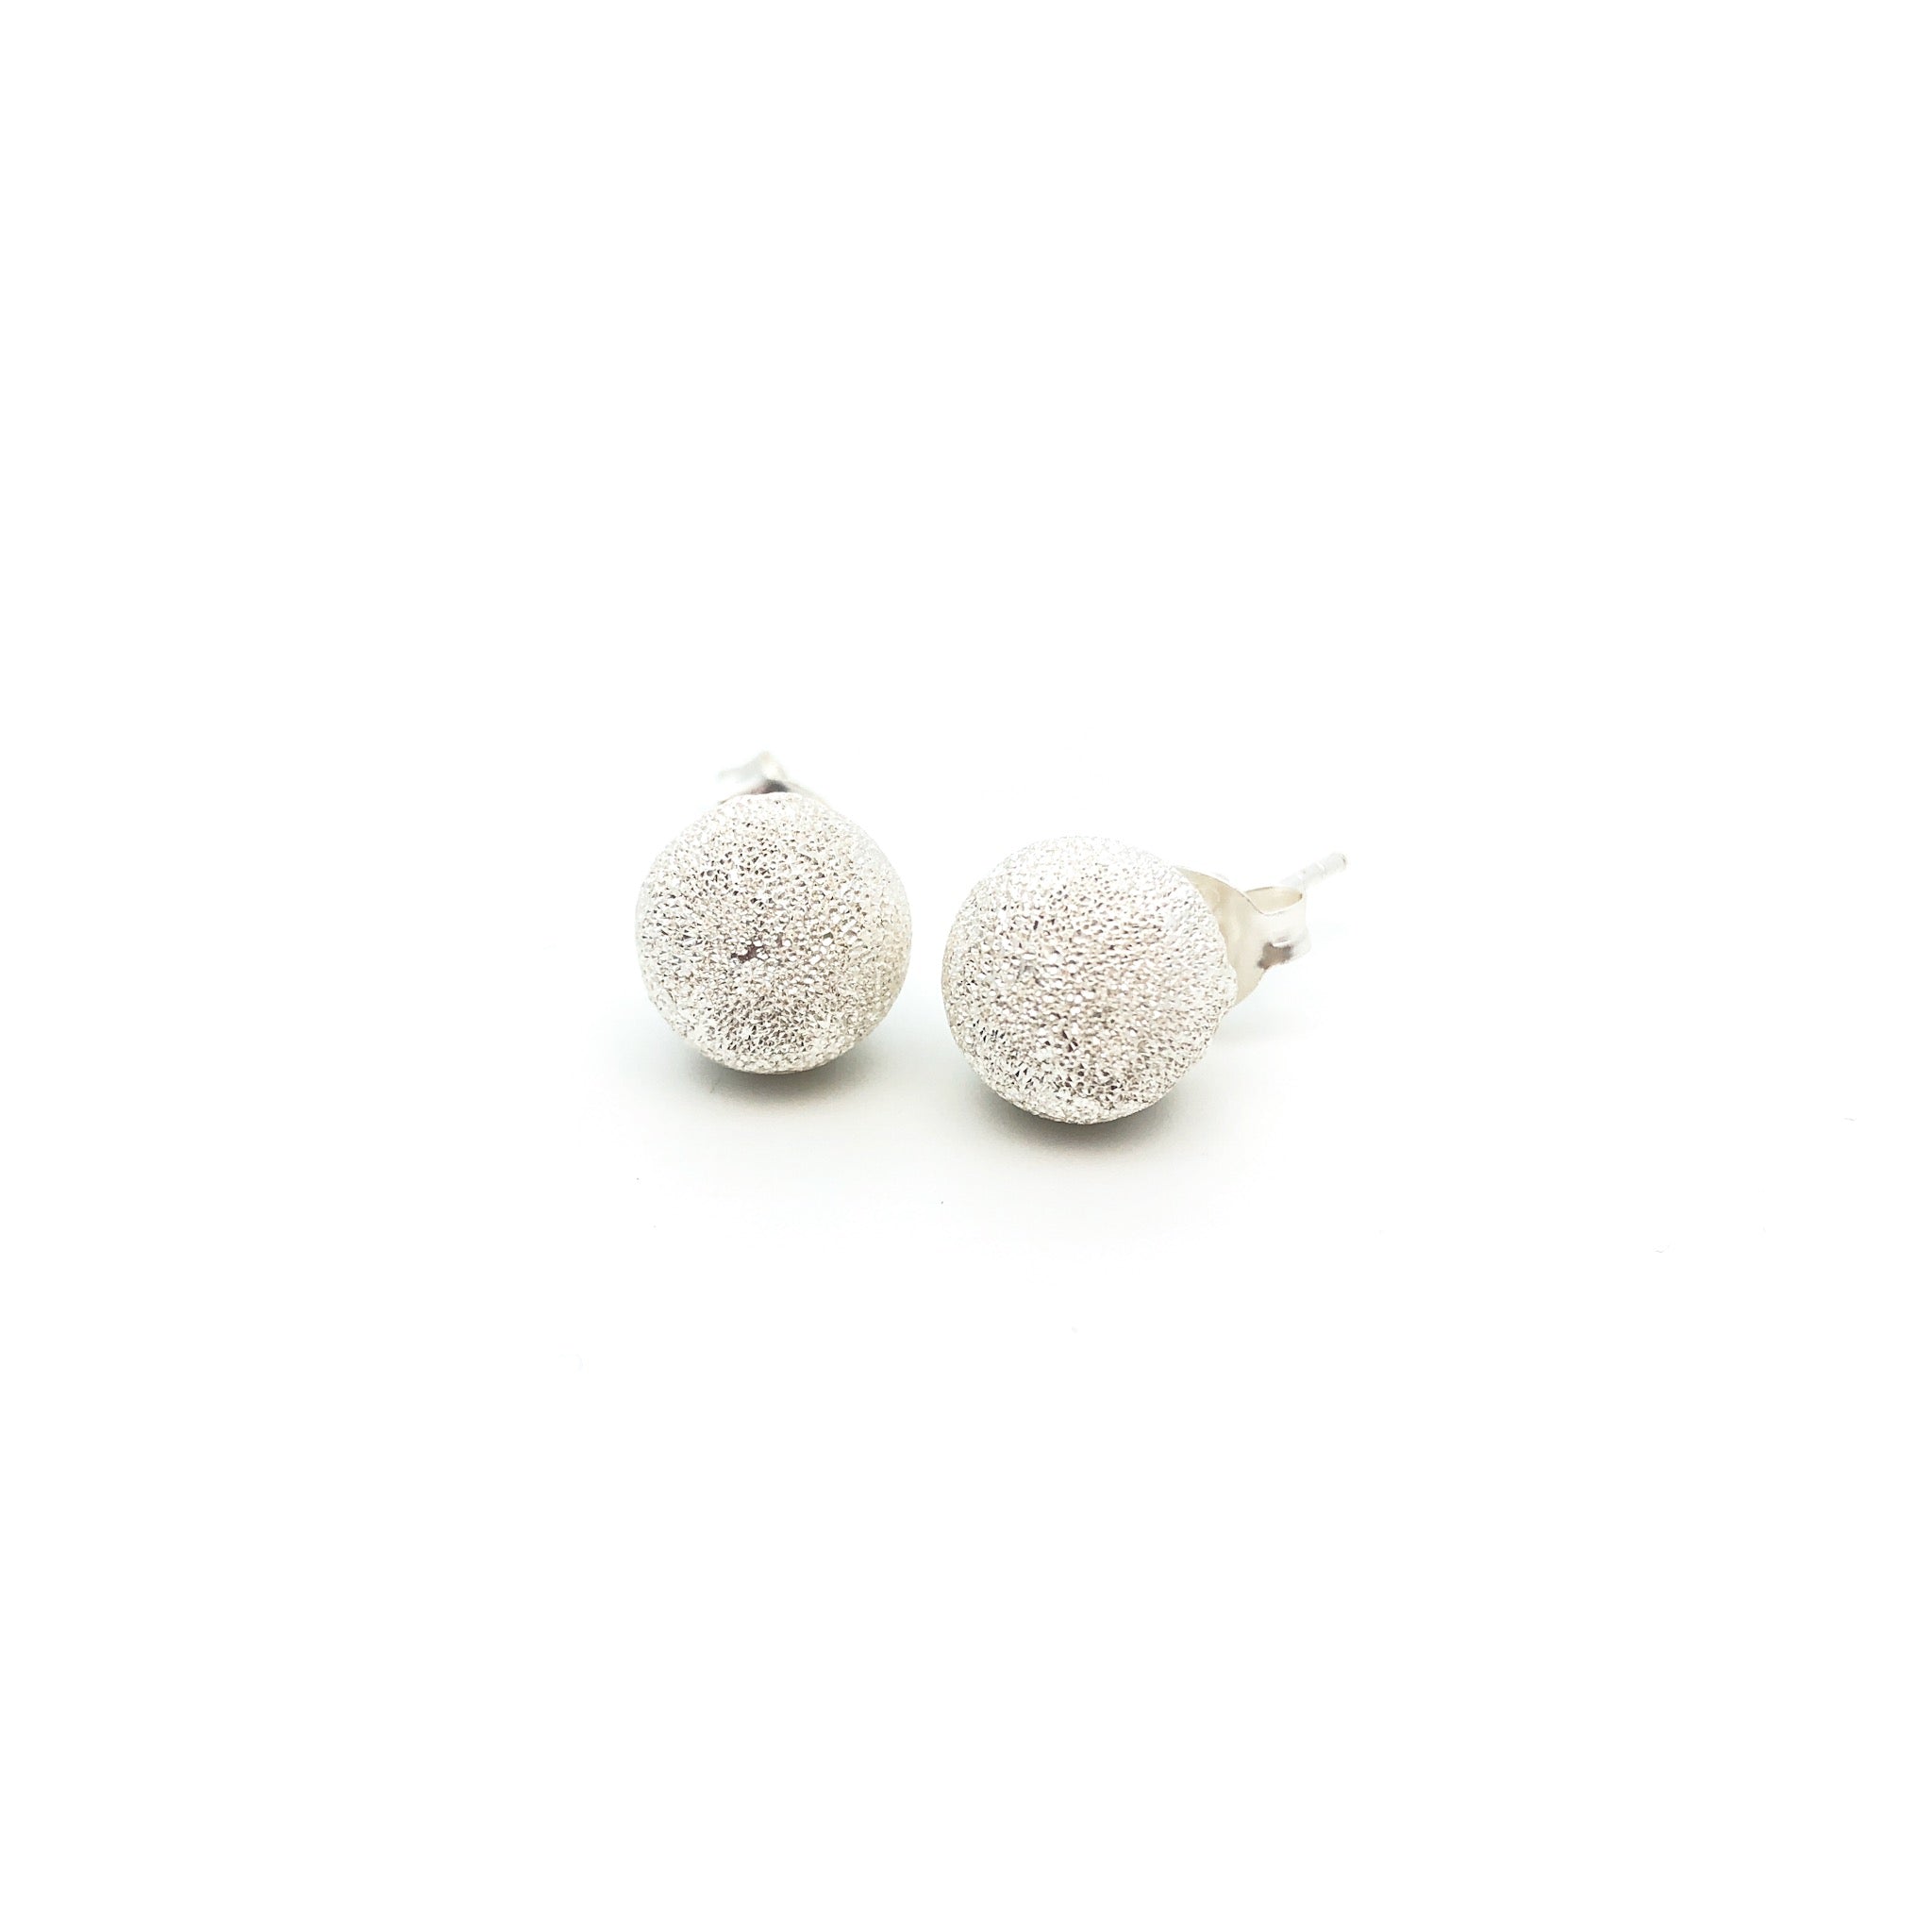 Stardust Silver (Large) Studs - Stone Heart 